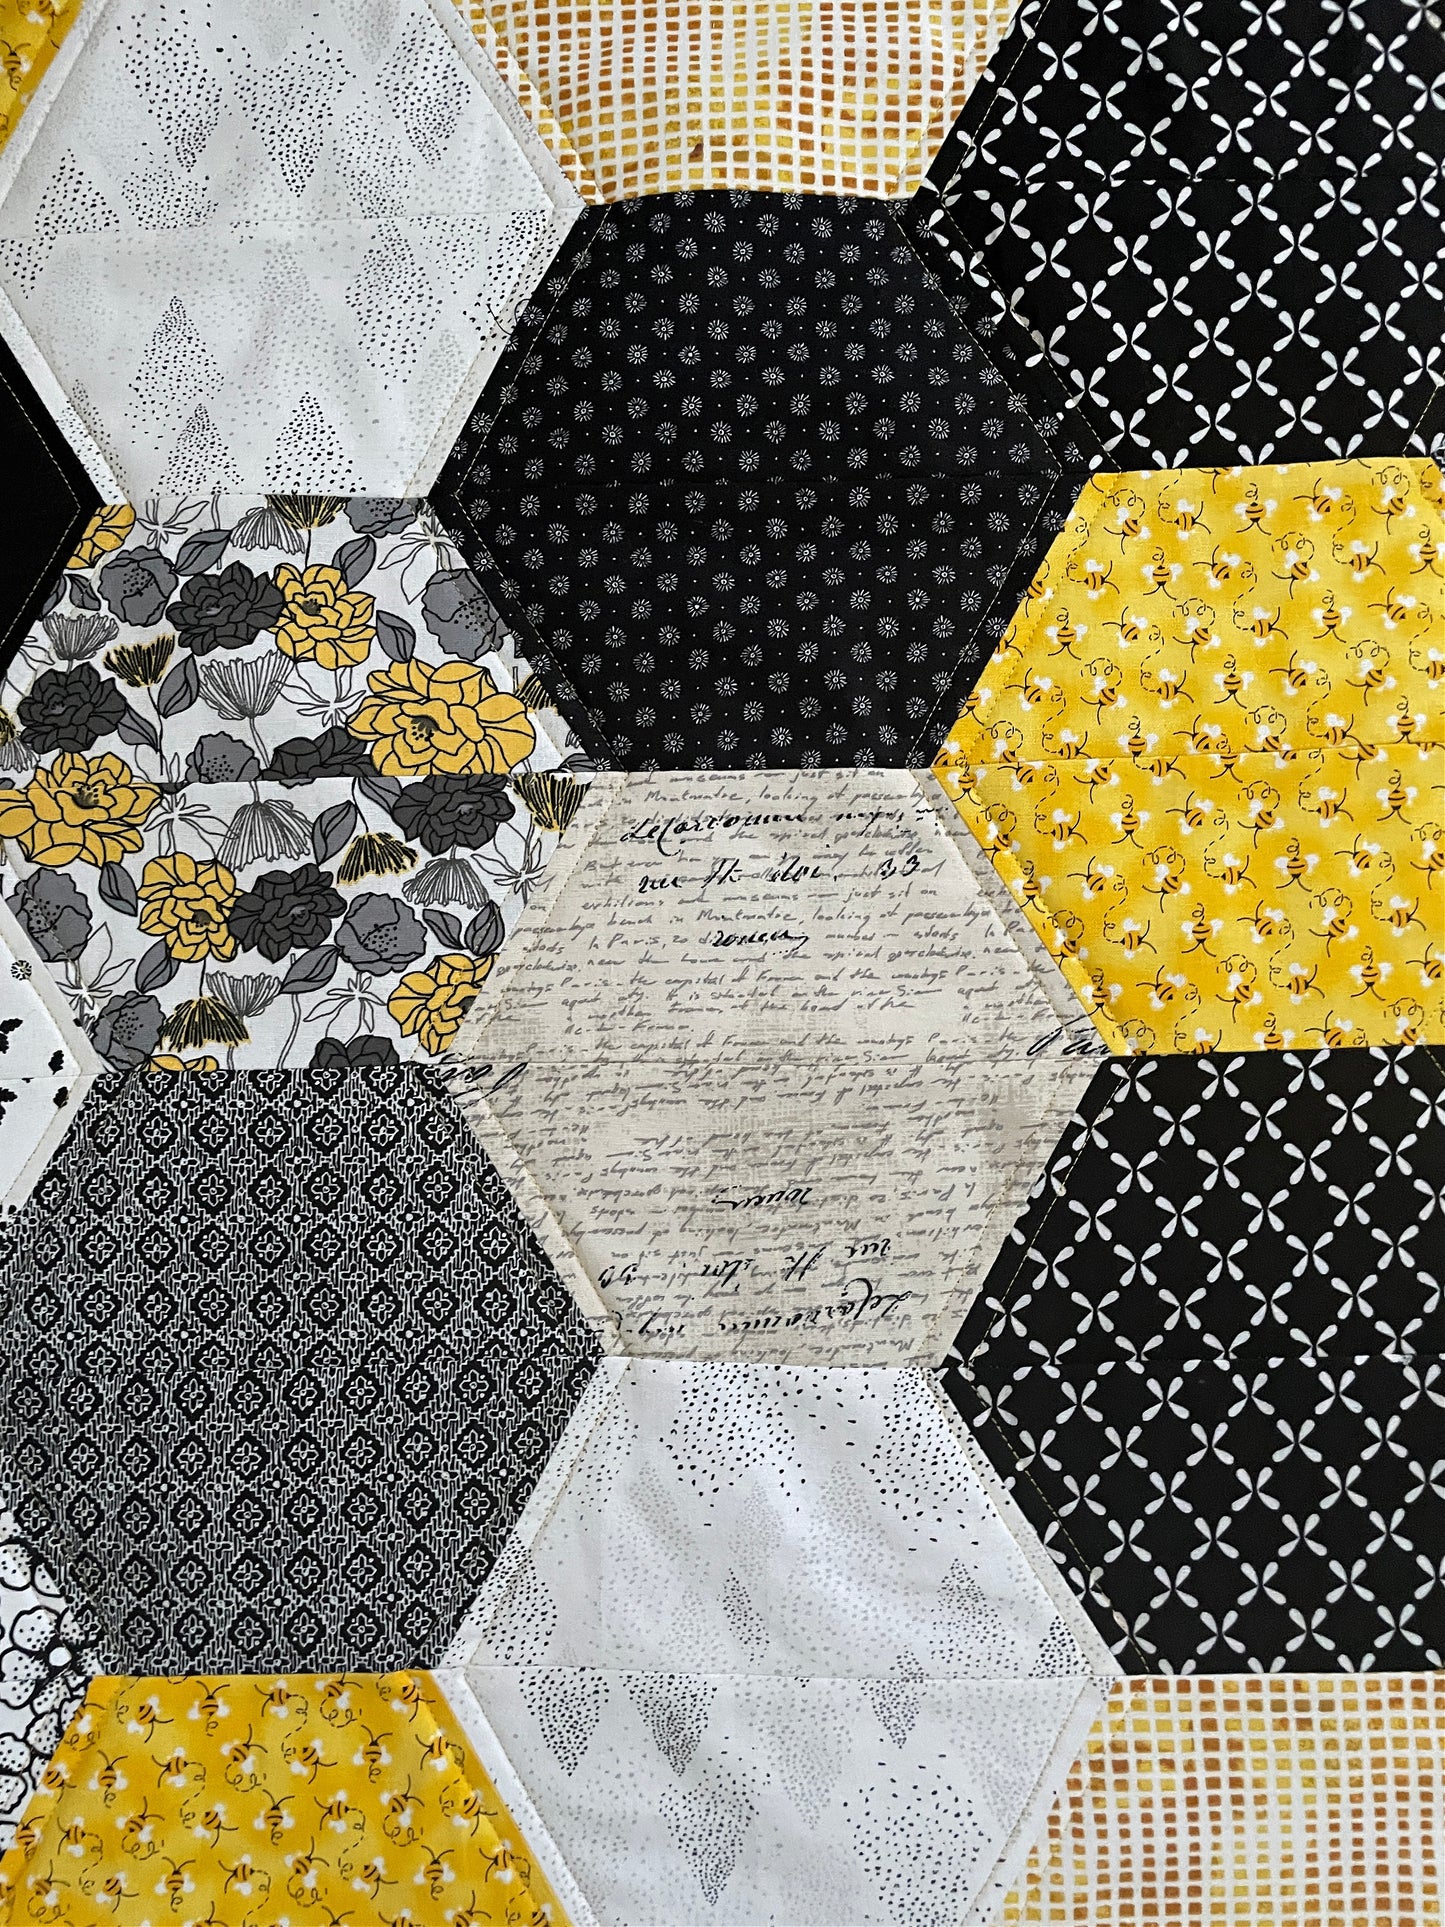 Handmade Modern Quilted Table Runner in Black, Yellow, and White Hexagons